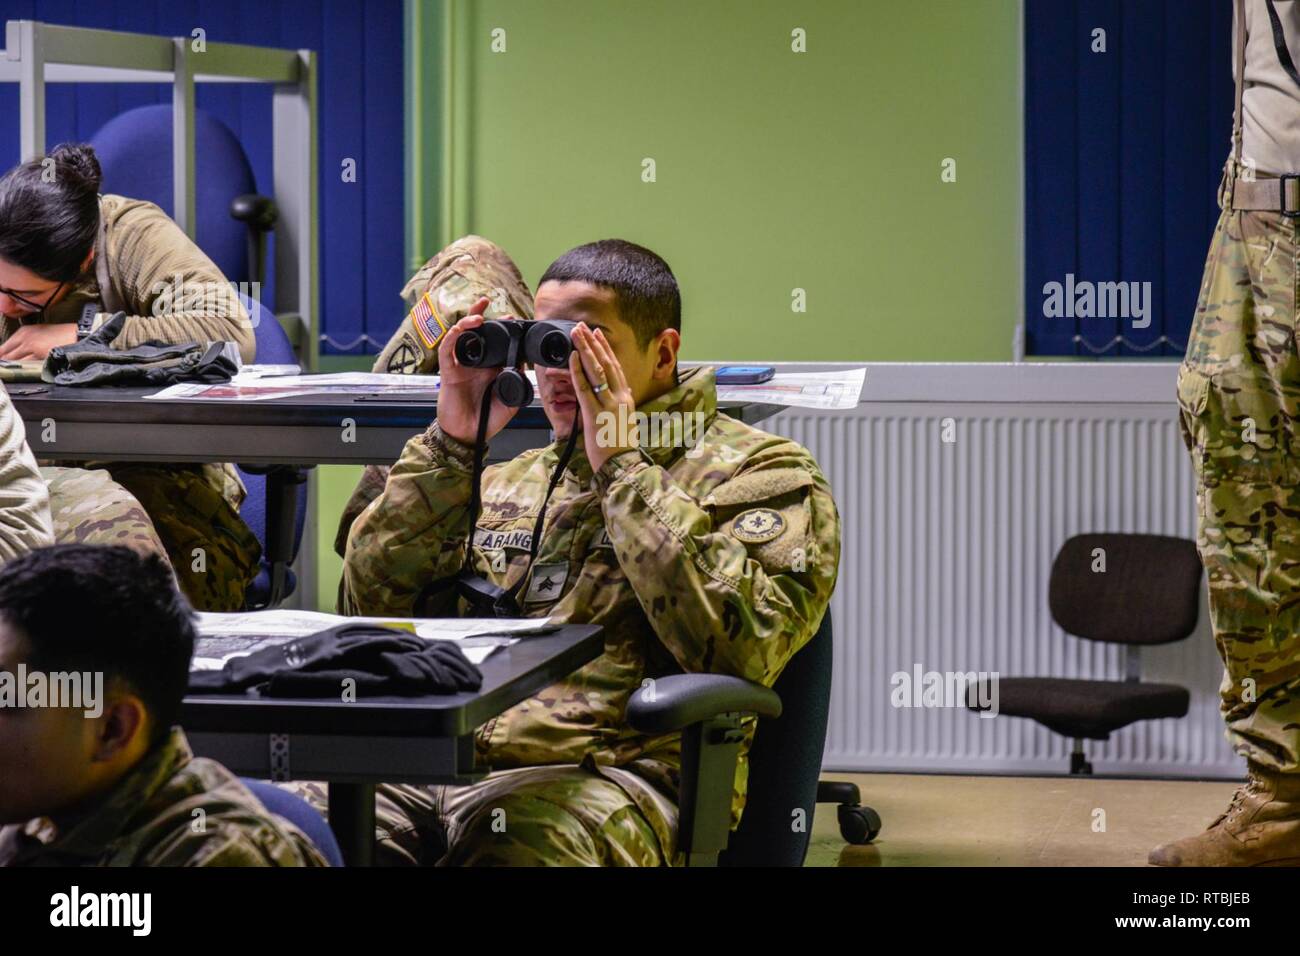 Sergeant Brian Arrango, assigned to First Squadron, Second Cavalry Regiment “War Eagles”, using his binoculars during a training session at the Call For Fire Trainer (CFFT) at Training Support Center. The CFFT provides a lightweight, rapidly deployable, observed fire training system that support all fire support missions. It is depicting current and future ammunitions and is expanded to train all soldiers regardless of MOS. Baumholder, Germany on February 09, 2019 Stock Photo